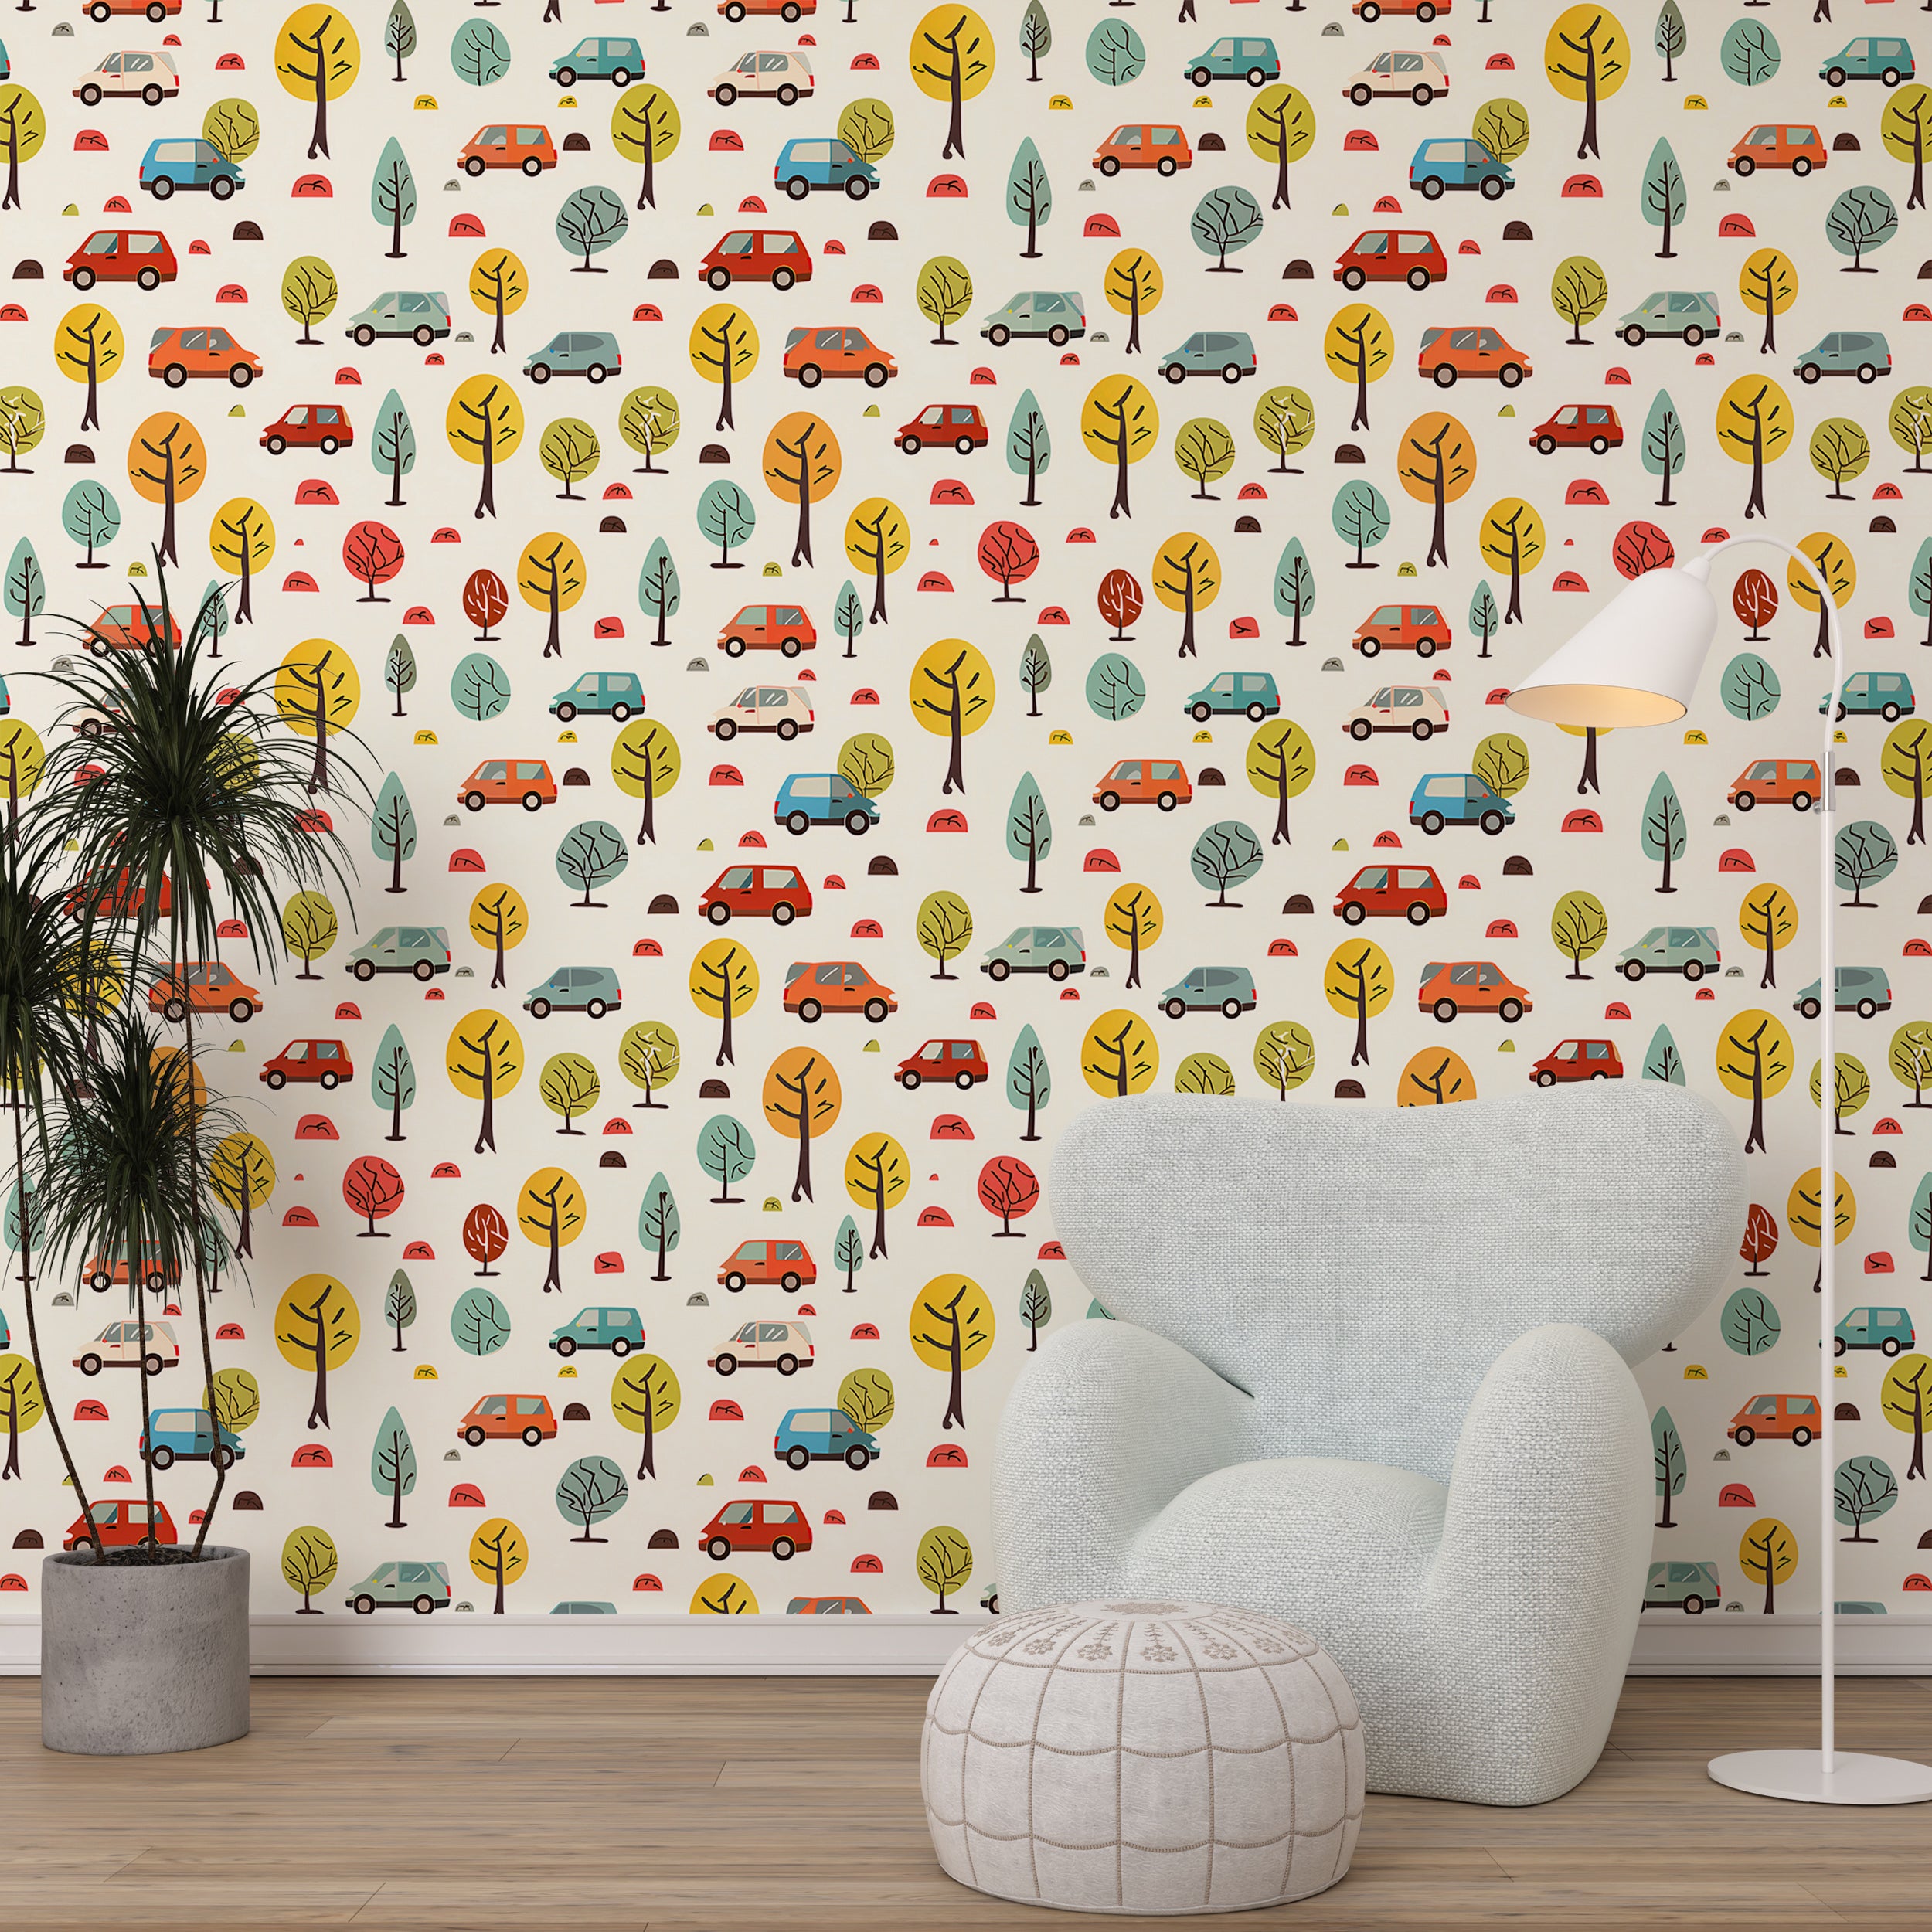 Cars and Trees Wallpaper, Colorful Nursery Wallpaper, Watercolor Kids Room Peel and Stick Wall Decor, Cars and Trees Removable PVC-free